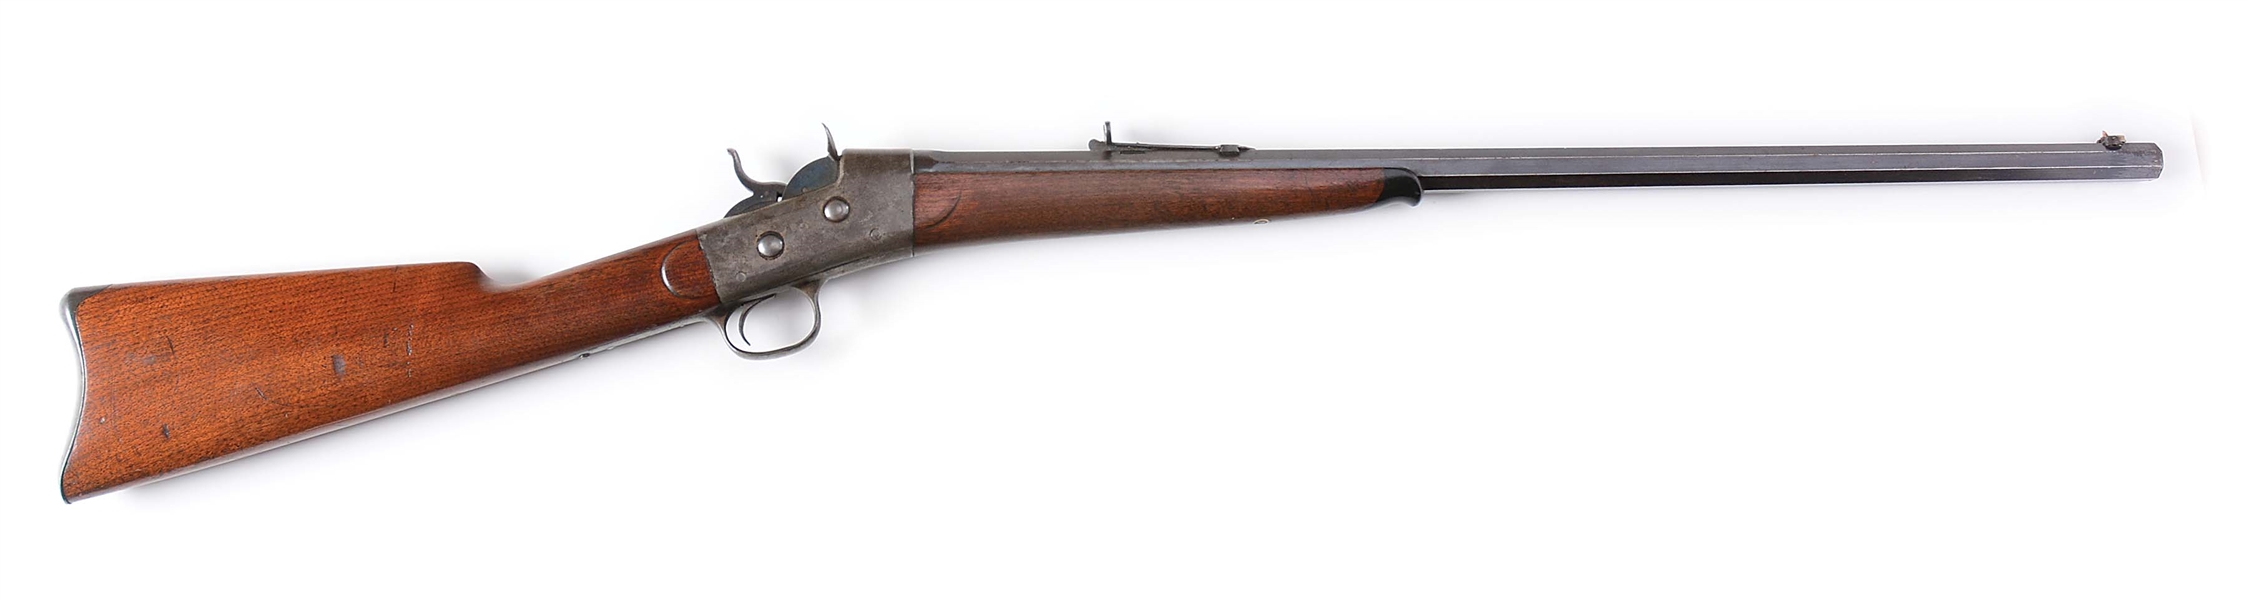 (A) WHITNEY ARMS CO. SINGLE SHOT ROLLING BLOCK RIFLE.